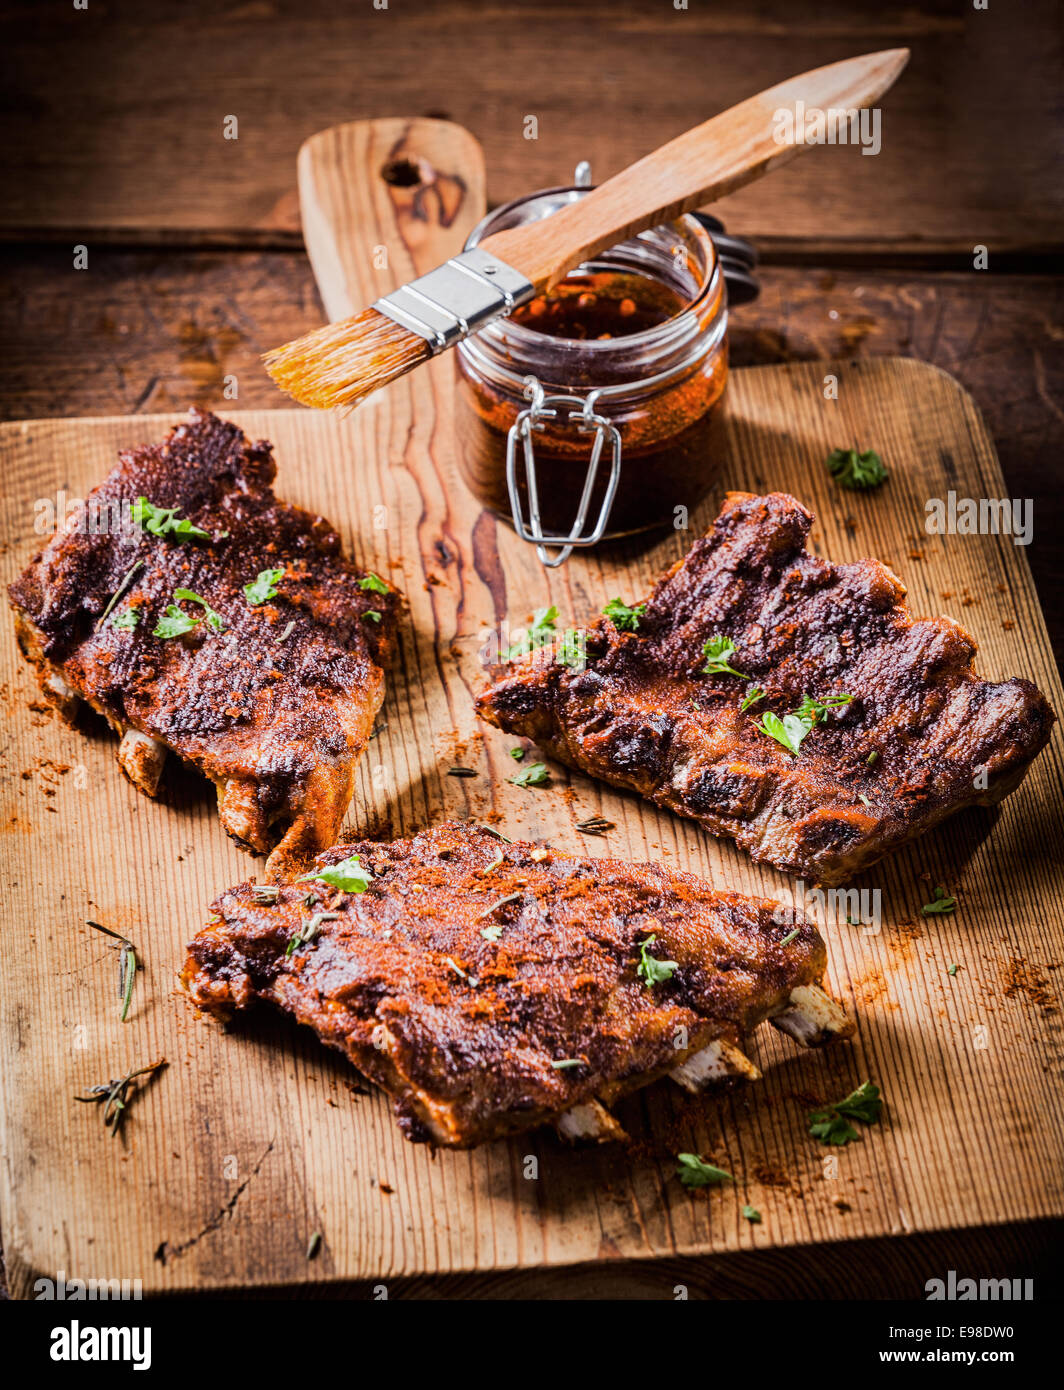 Three portions of spicy grilled ribs basted with a savory aromatic sauce and garnished with herbs for a delicious meal Stock Photo